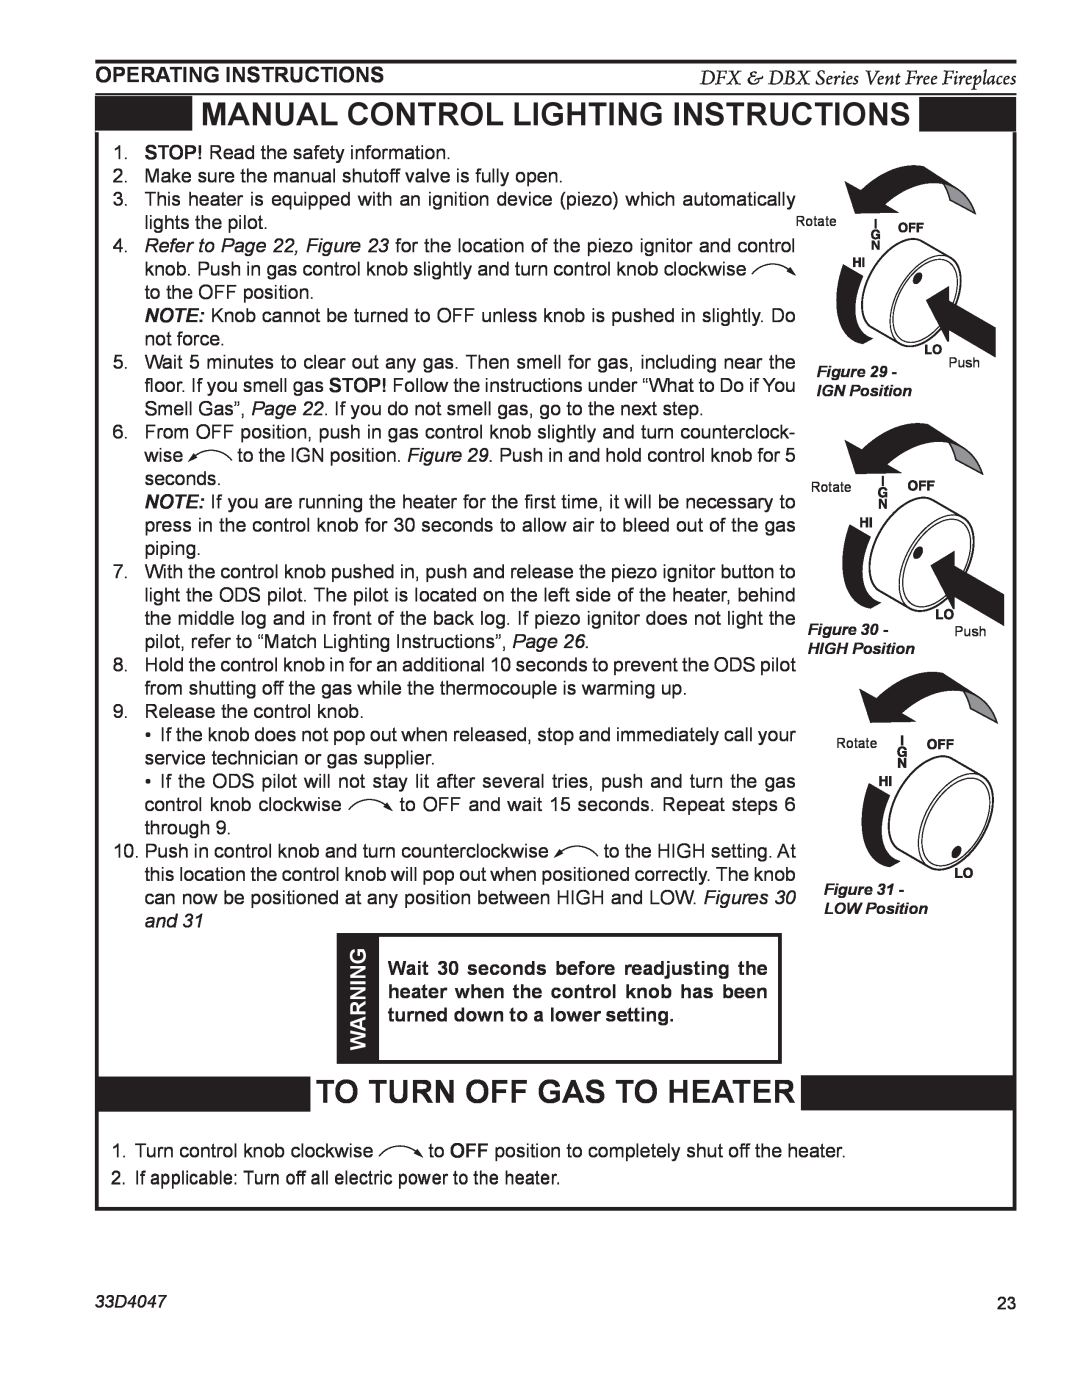 Monessen Hearth DFX24C MANUAL control lighting instructions, To Turn Off Gas To Heater, Operating Instructions 